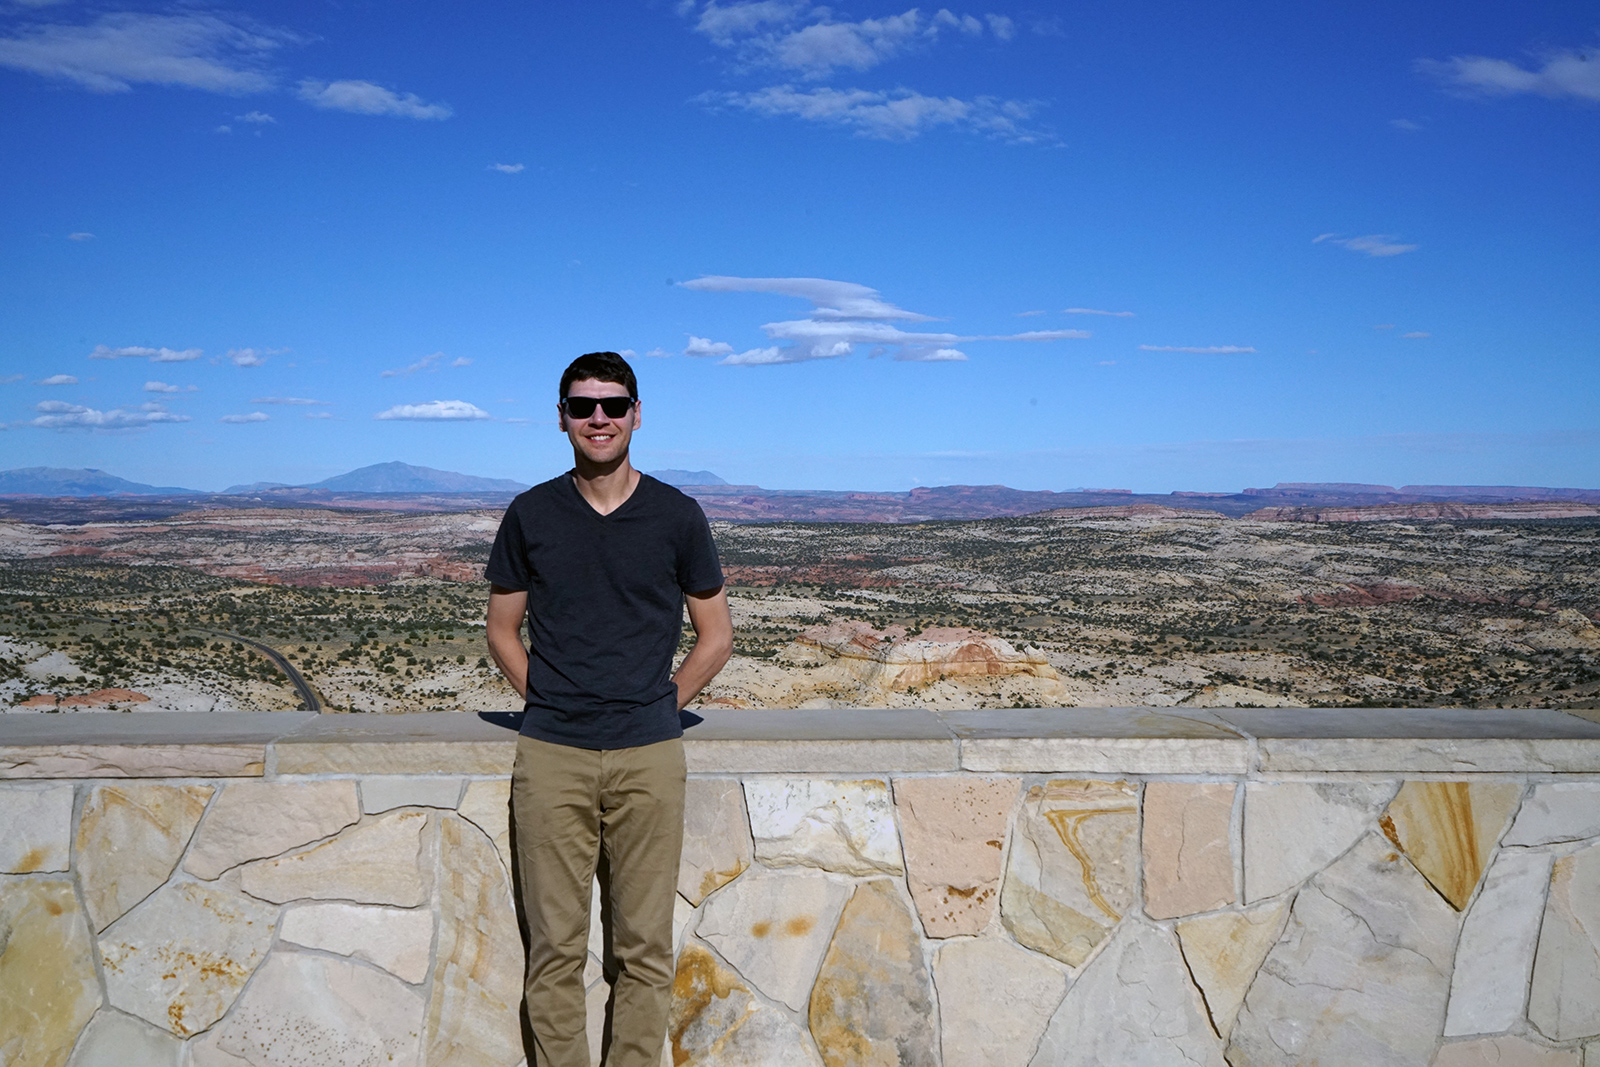 There are tons of scenic overlooks as you drive through Escalante / Grand Staircase